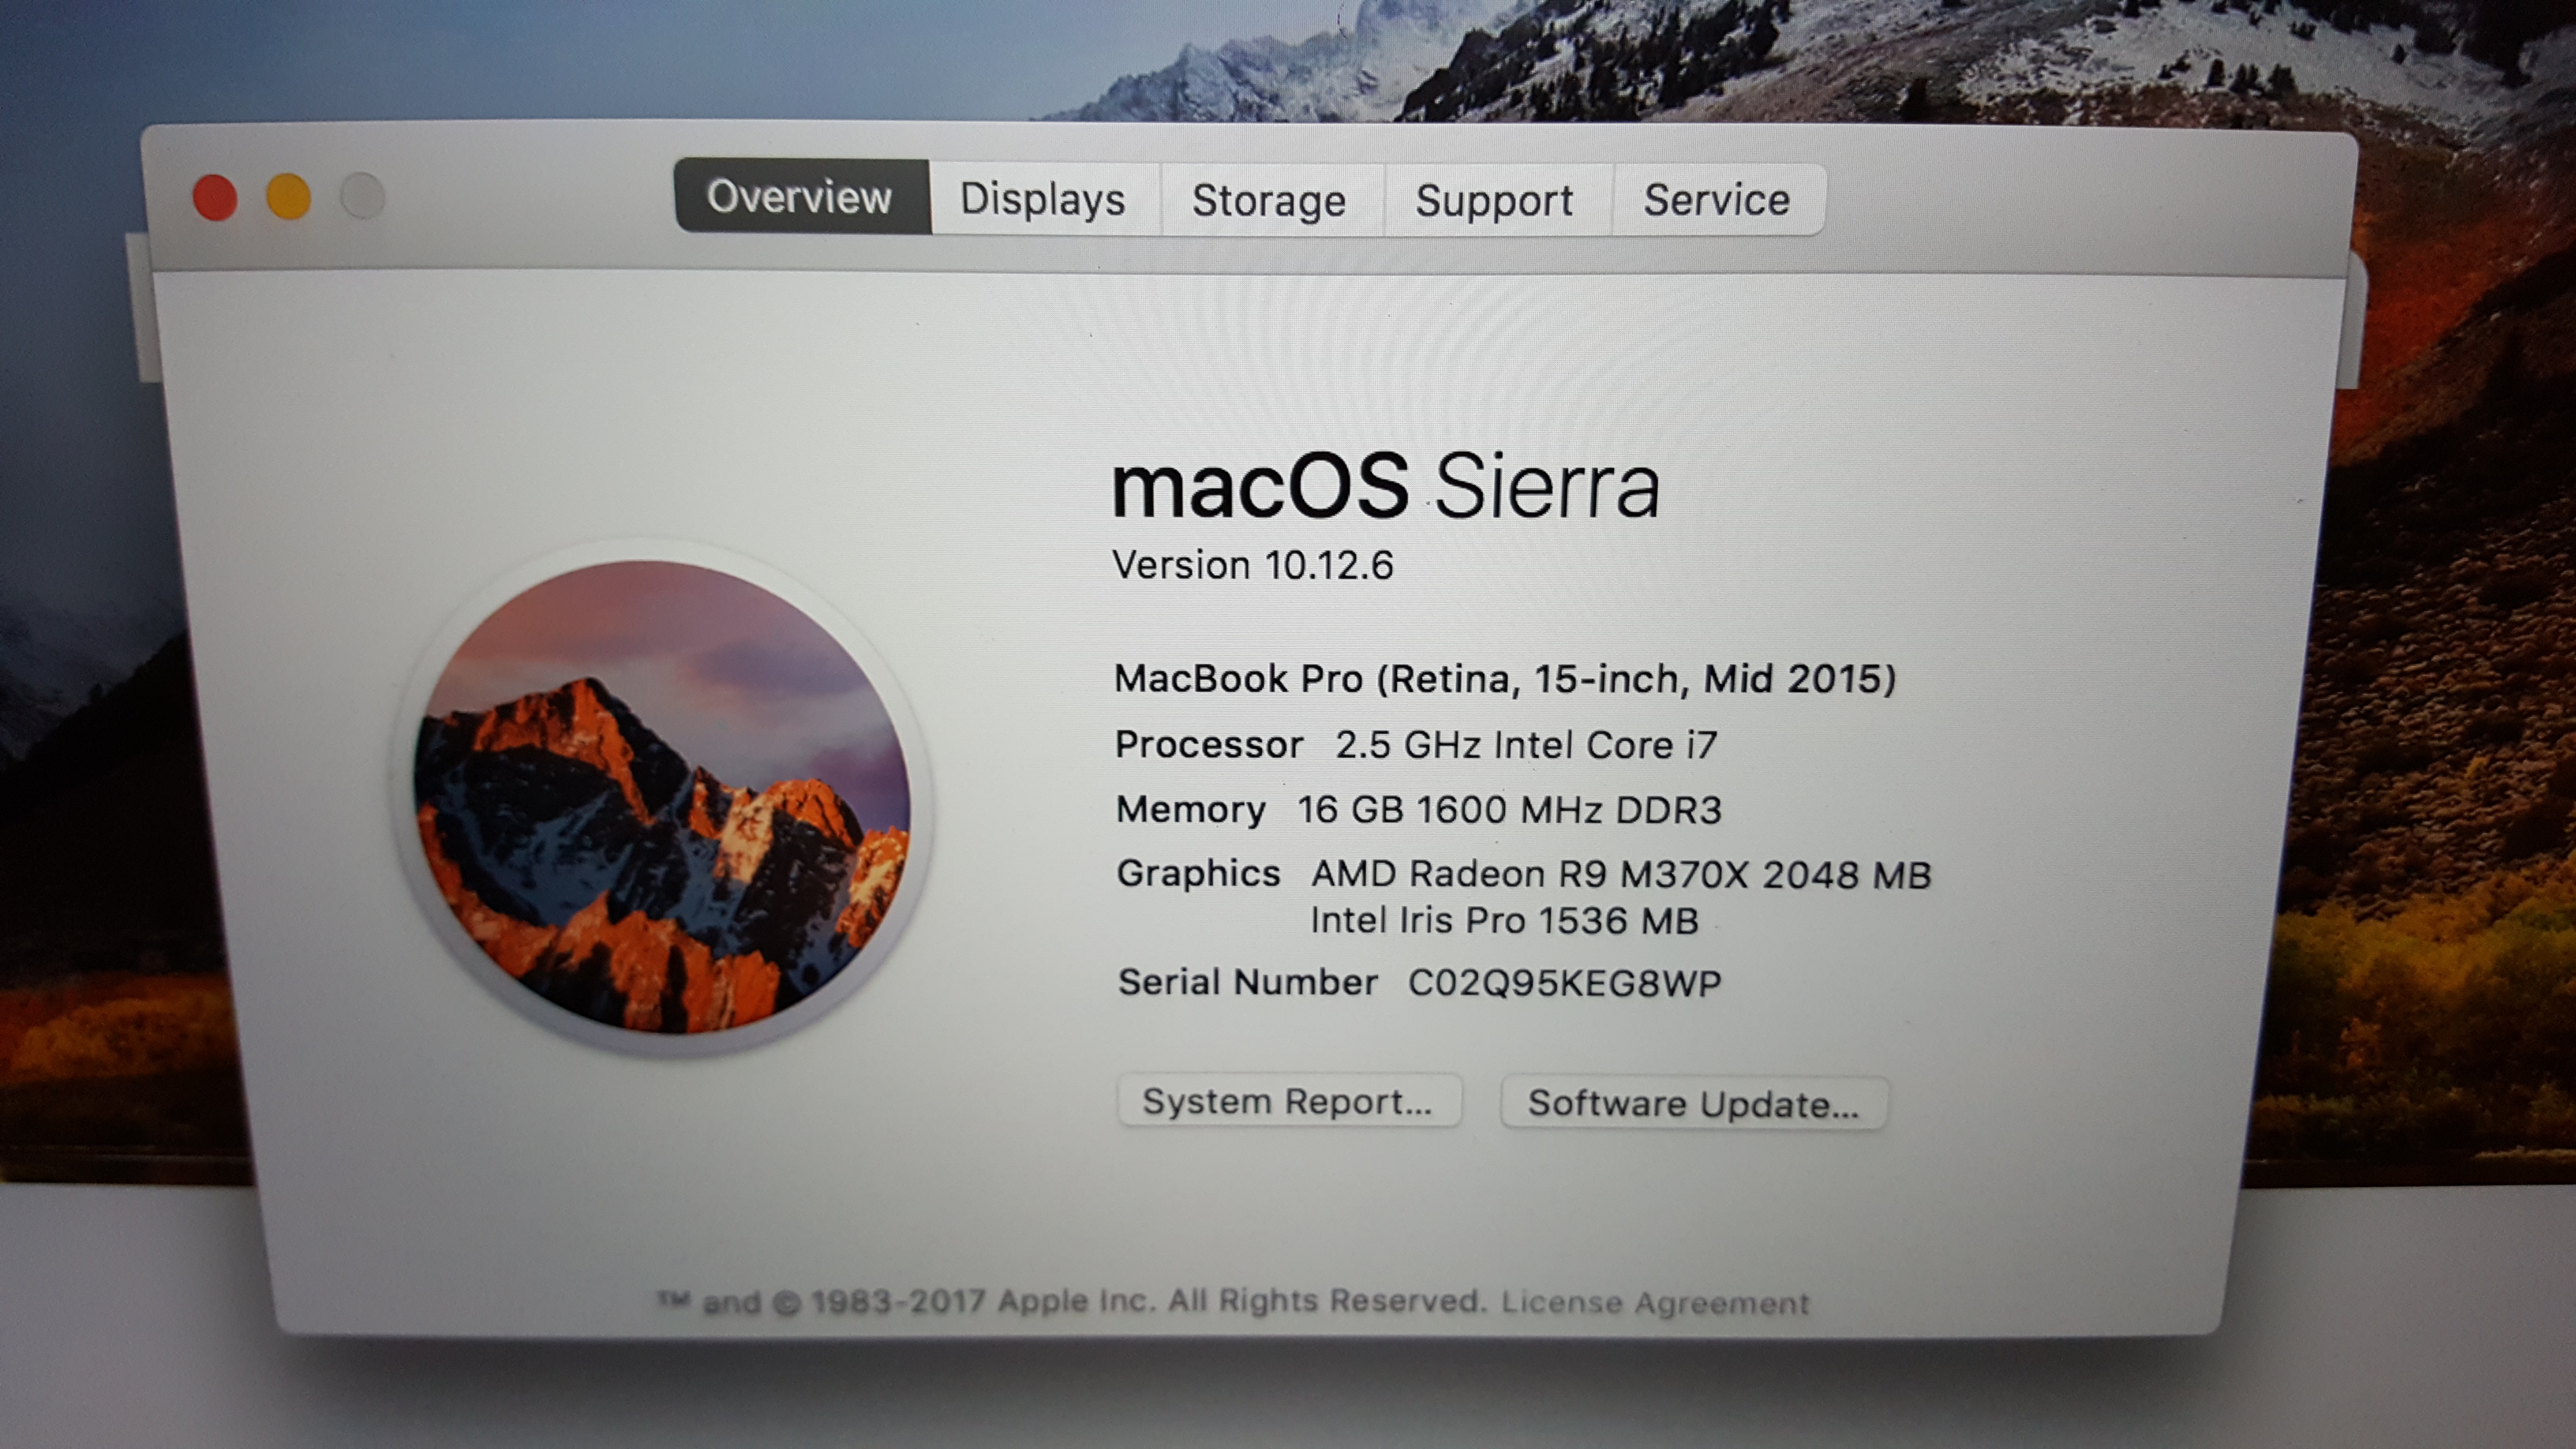 is sierra osx good for a mac book mid 2012